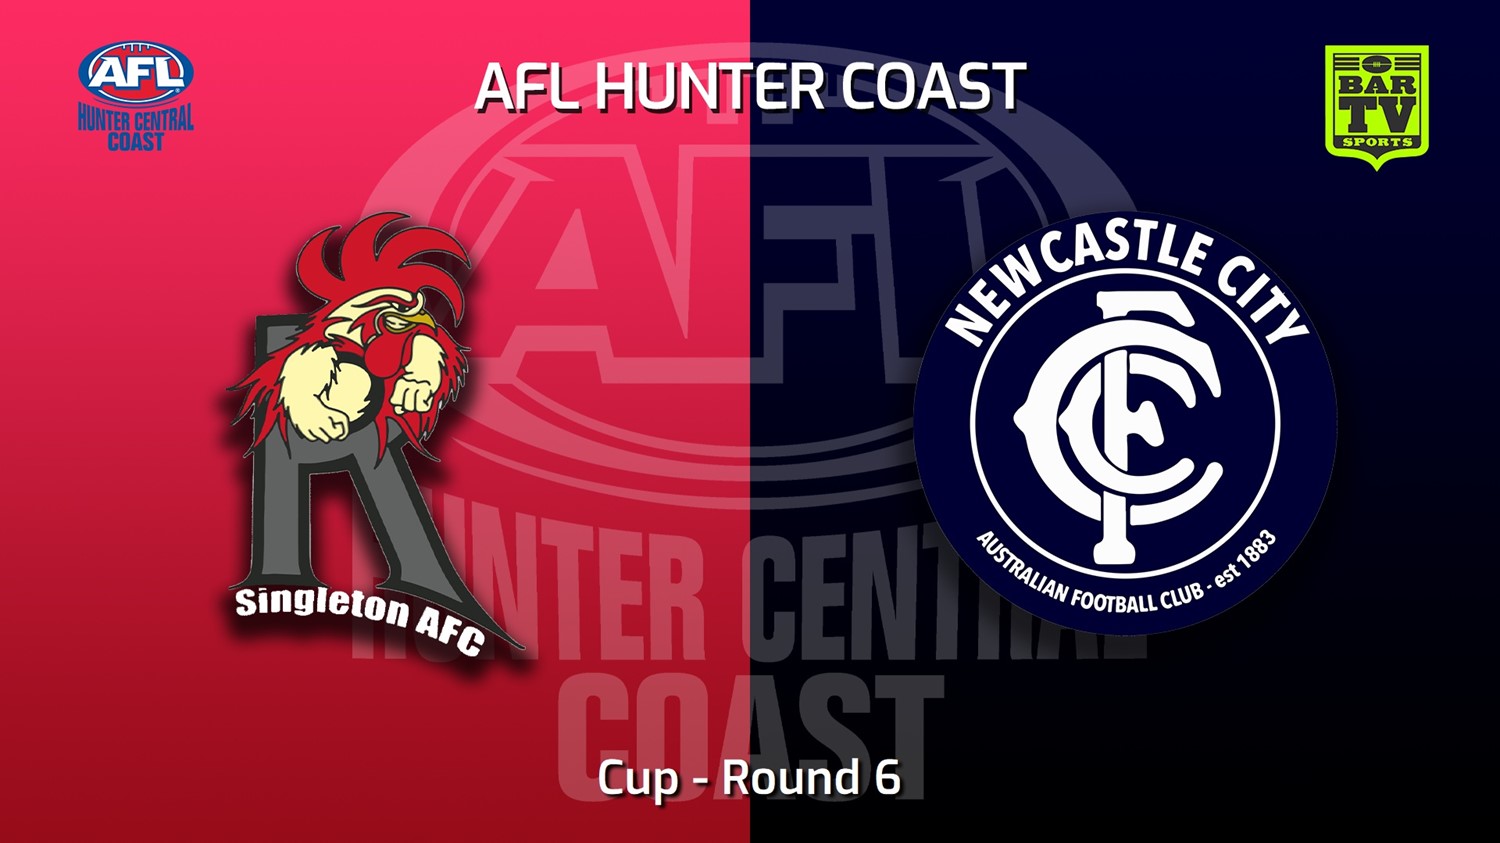 220618-AFL Hunter Central Coast Round 6 - Cup - Singleton Roosters v Newcastle City  Minigame Slate Image